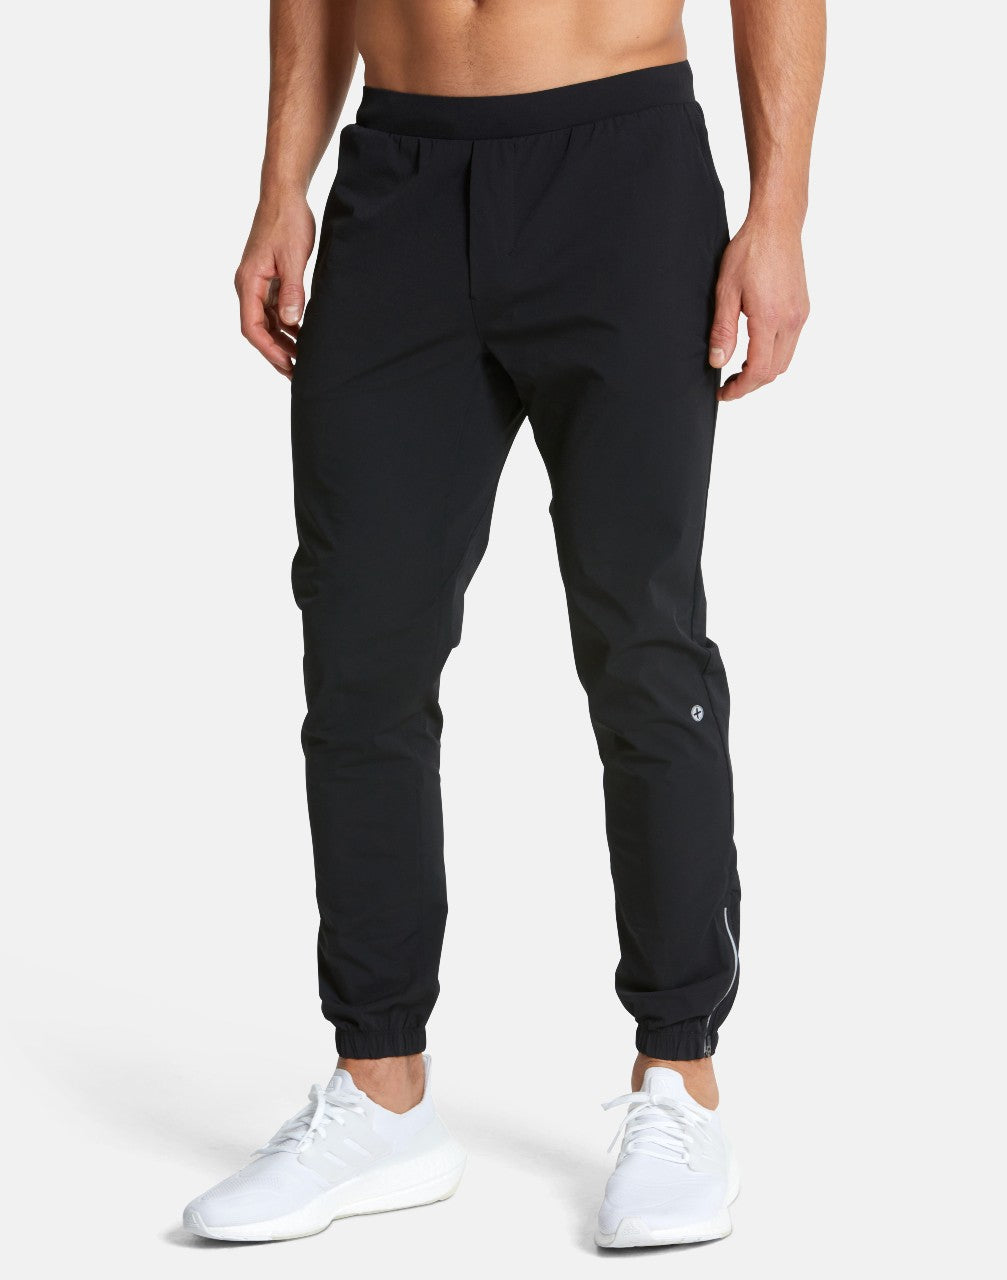 Gym+Coffee In Motion Jogger (Mens) - Black